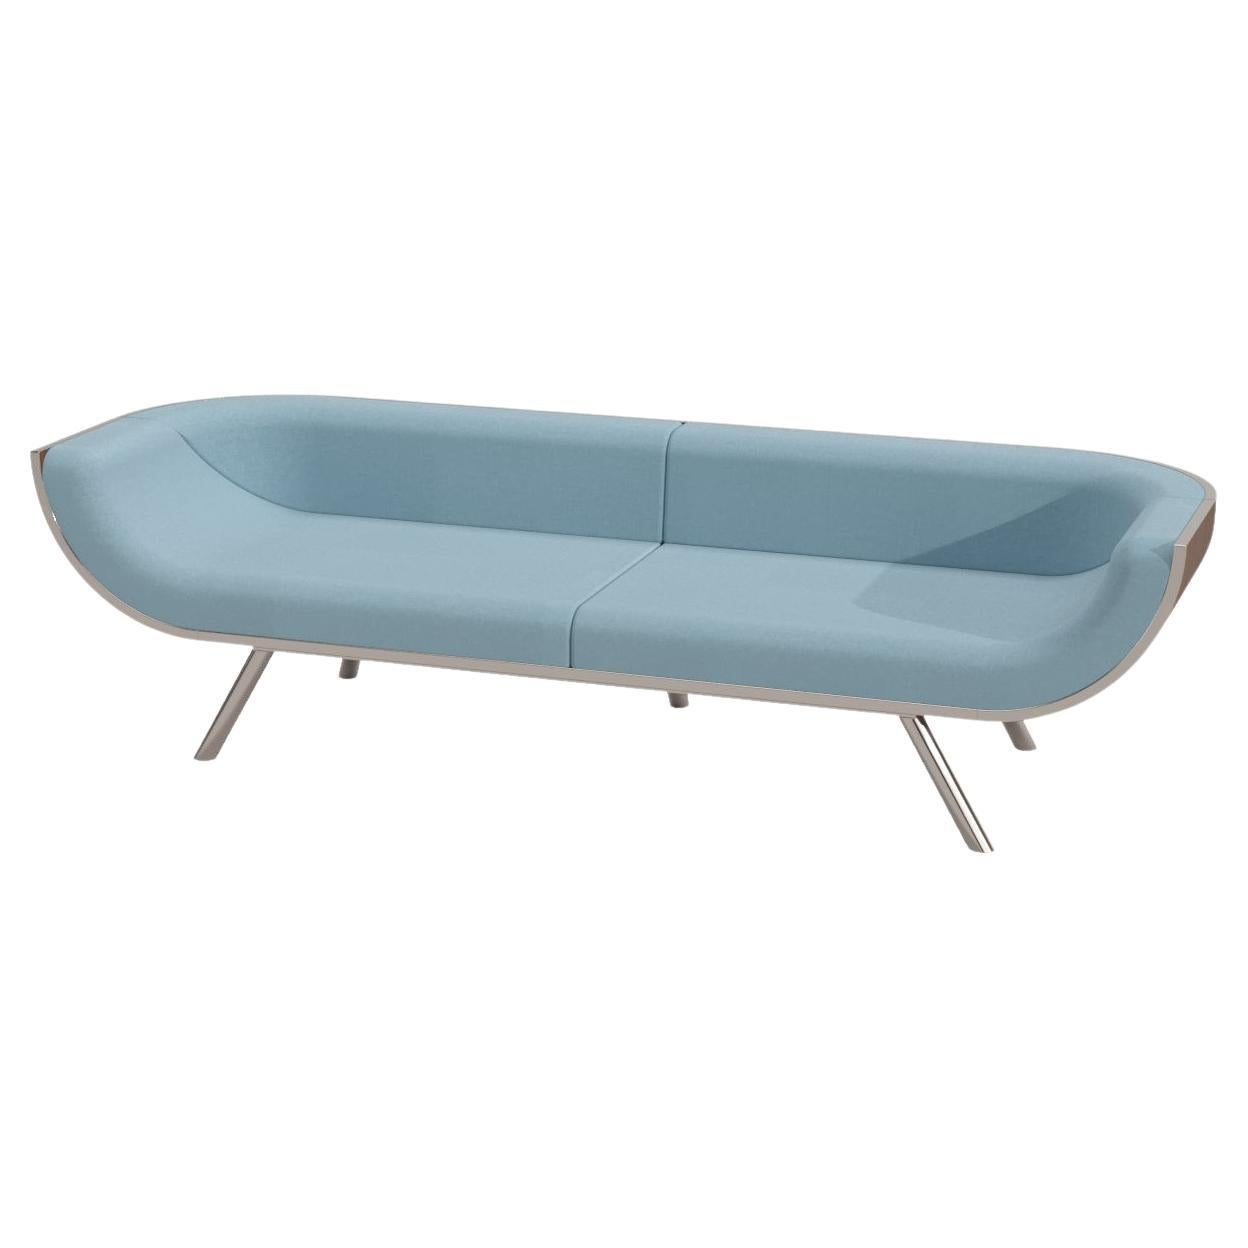 Three-Seater Sofa with Curved Back in Walnut Wood and Brushed Stainless Steel